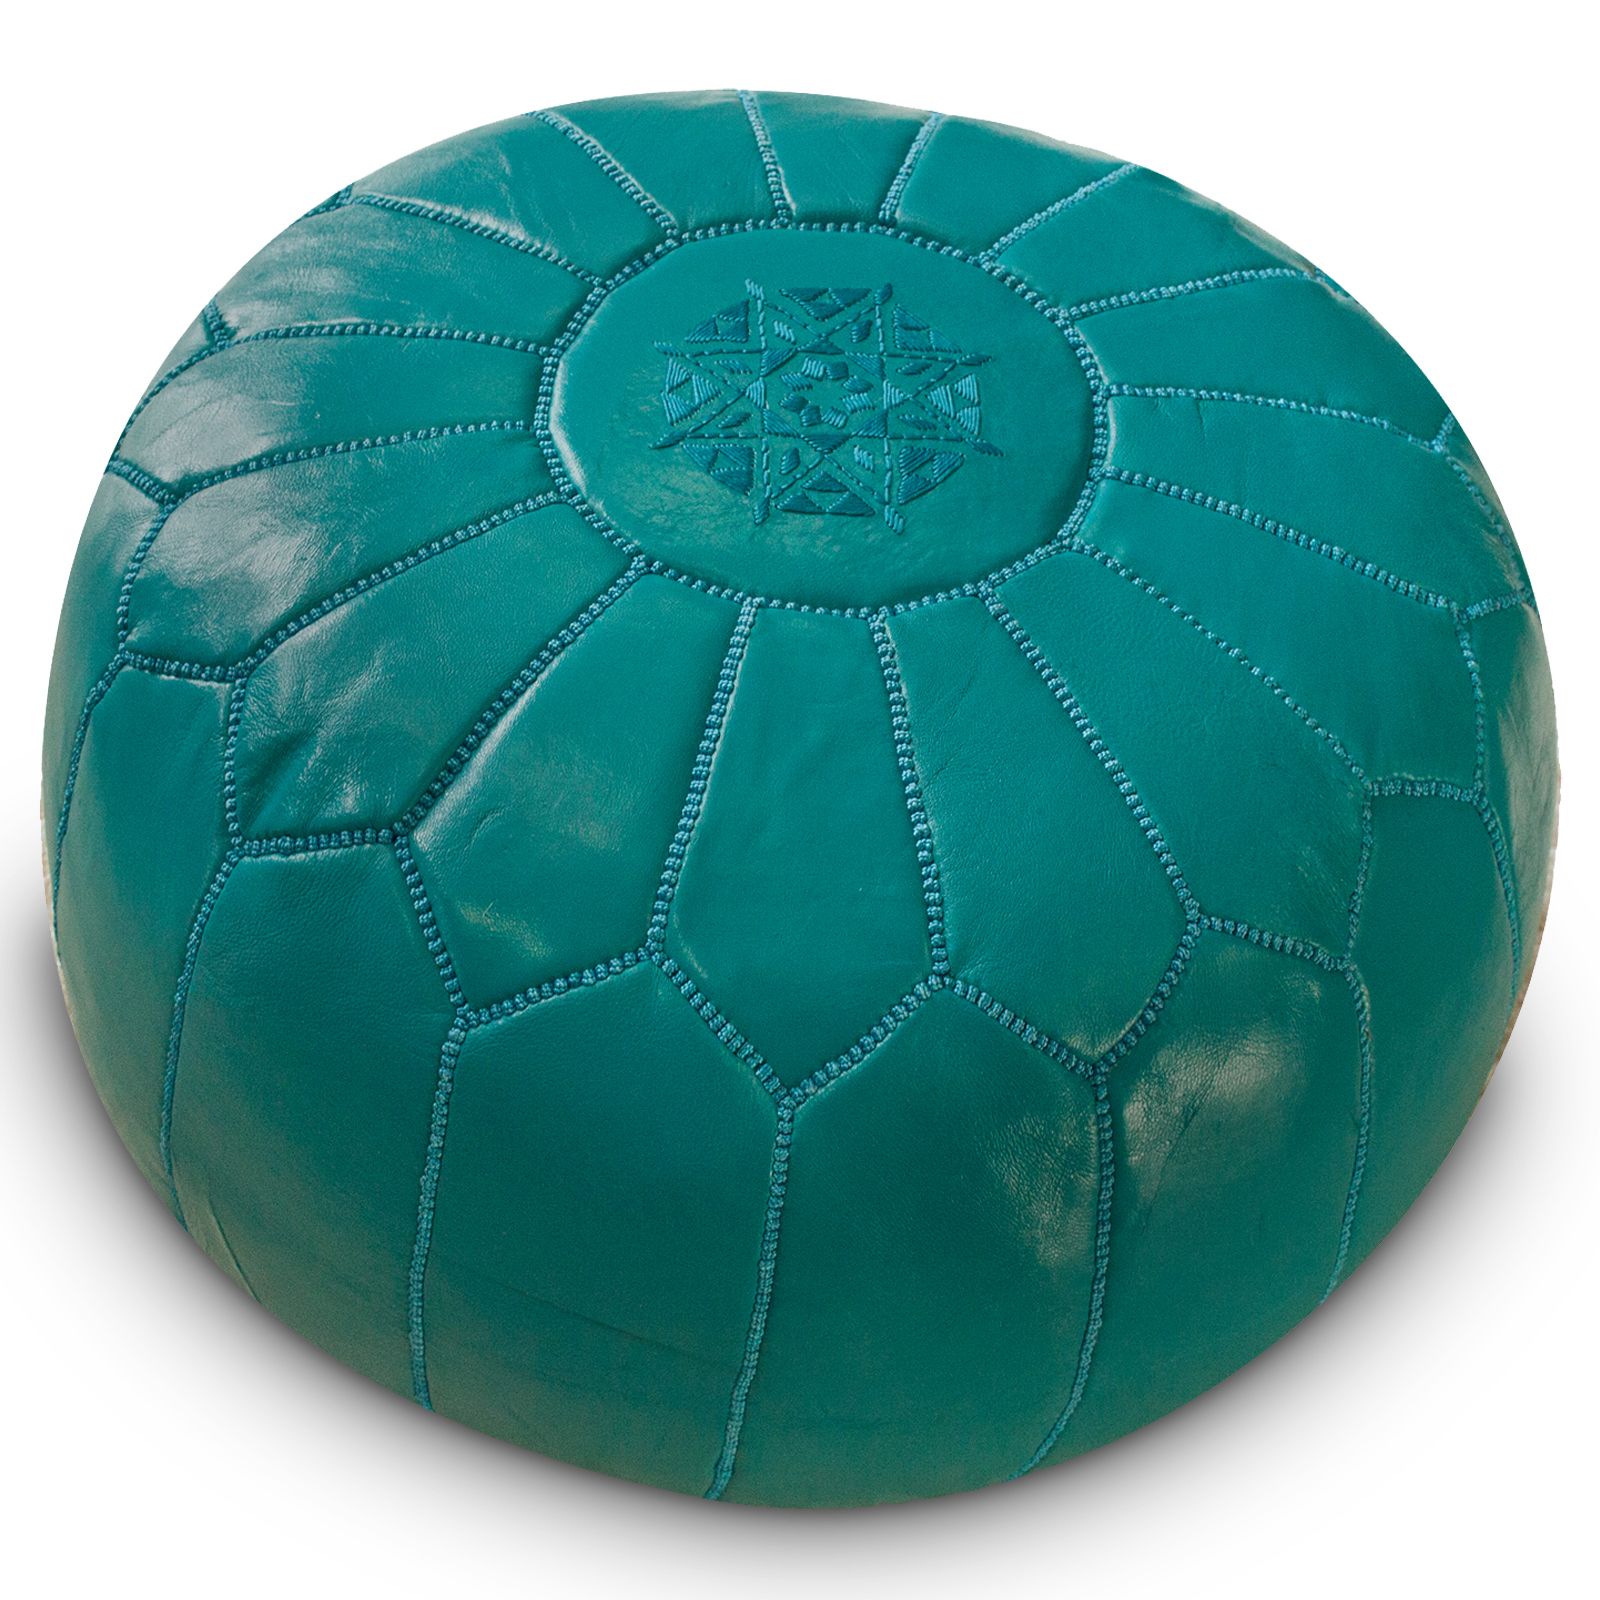 Textured Aqua Round Pouf Ottomans Intended For Popular Moroccan Ottoman – Turquoise At Hayneedle (View 6 of 10)